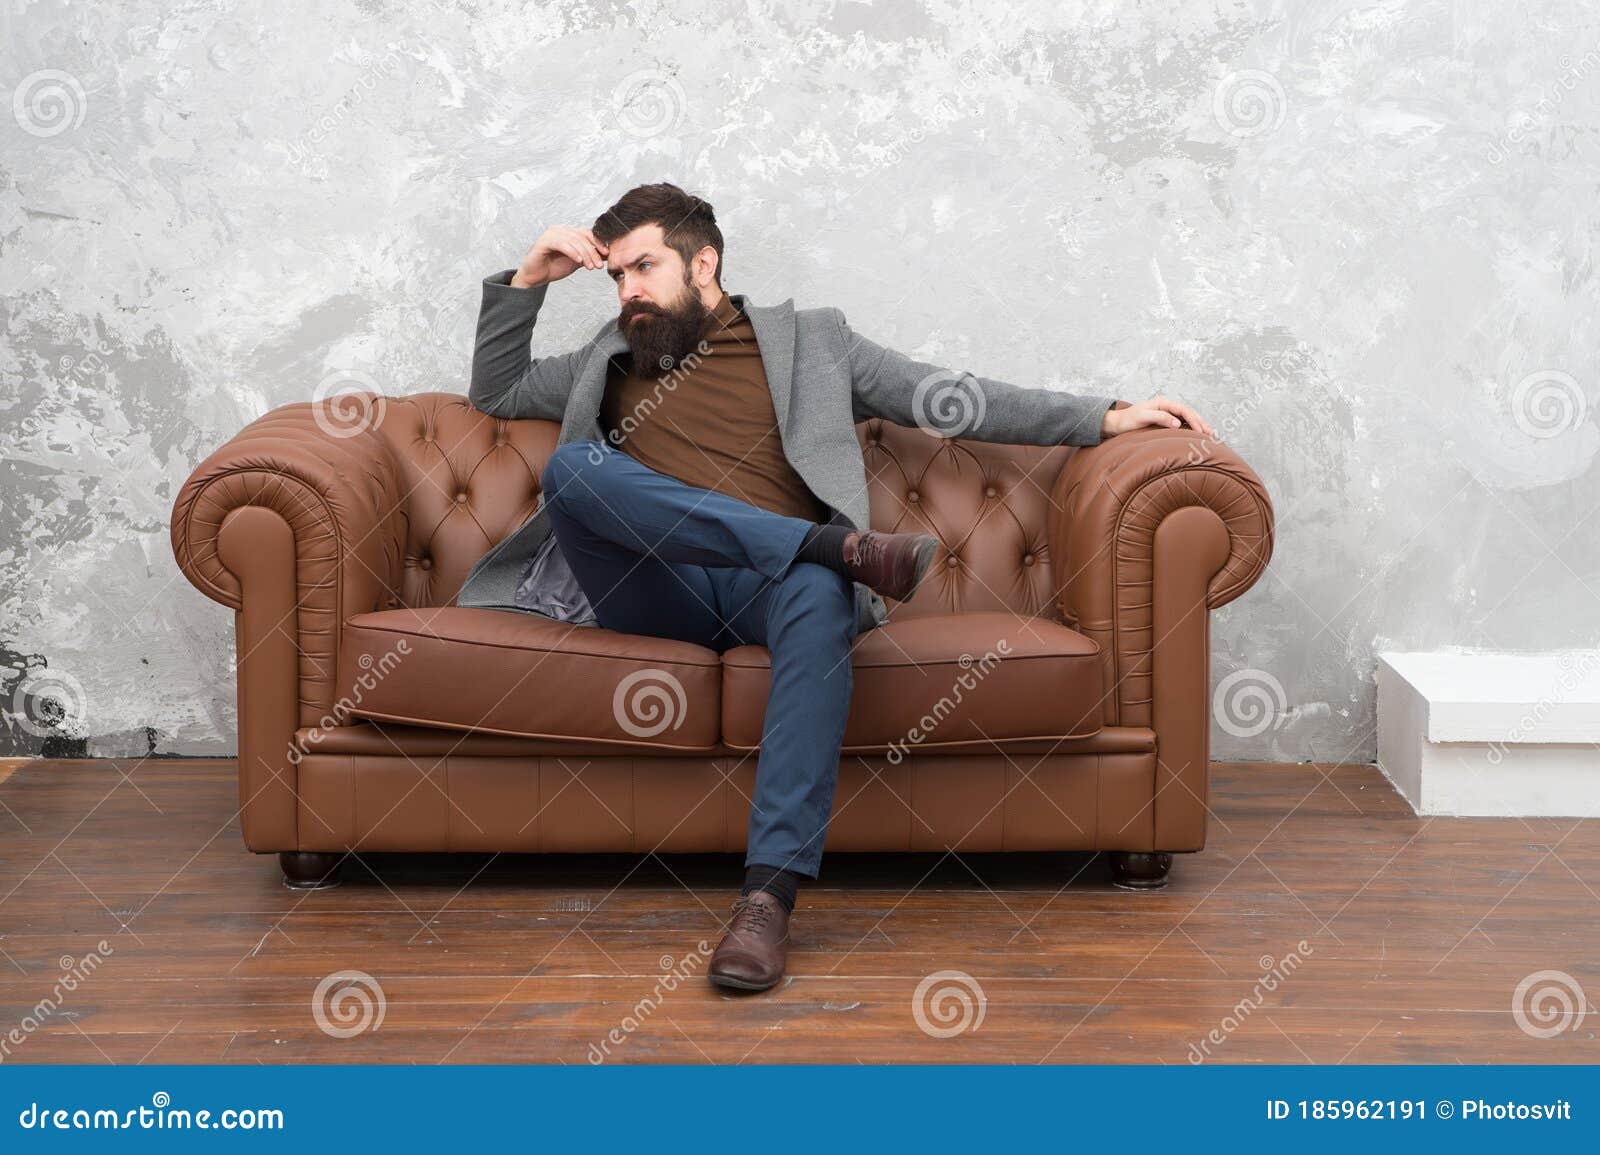 Beardy Hipster. Serious Hipster Relax on Sofa. Businessman with Hipster ...